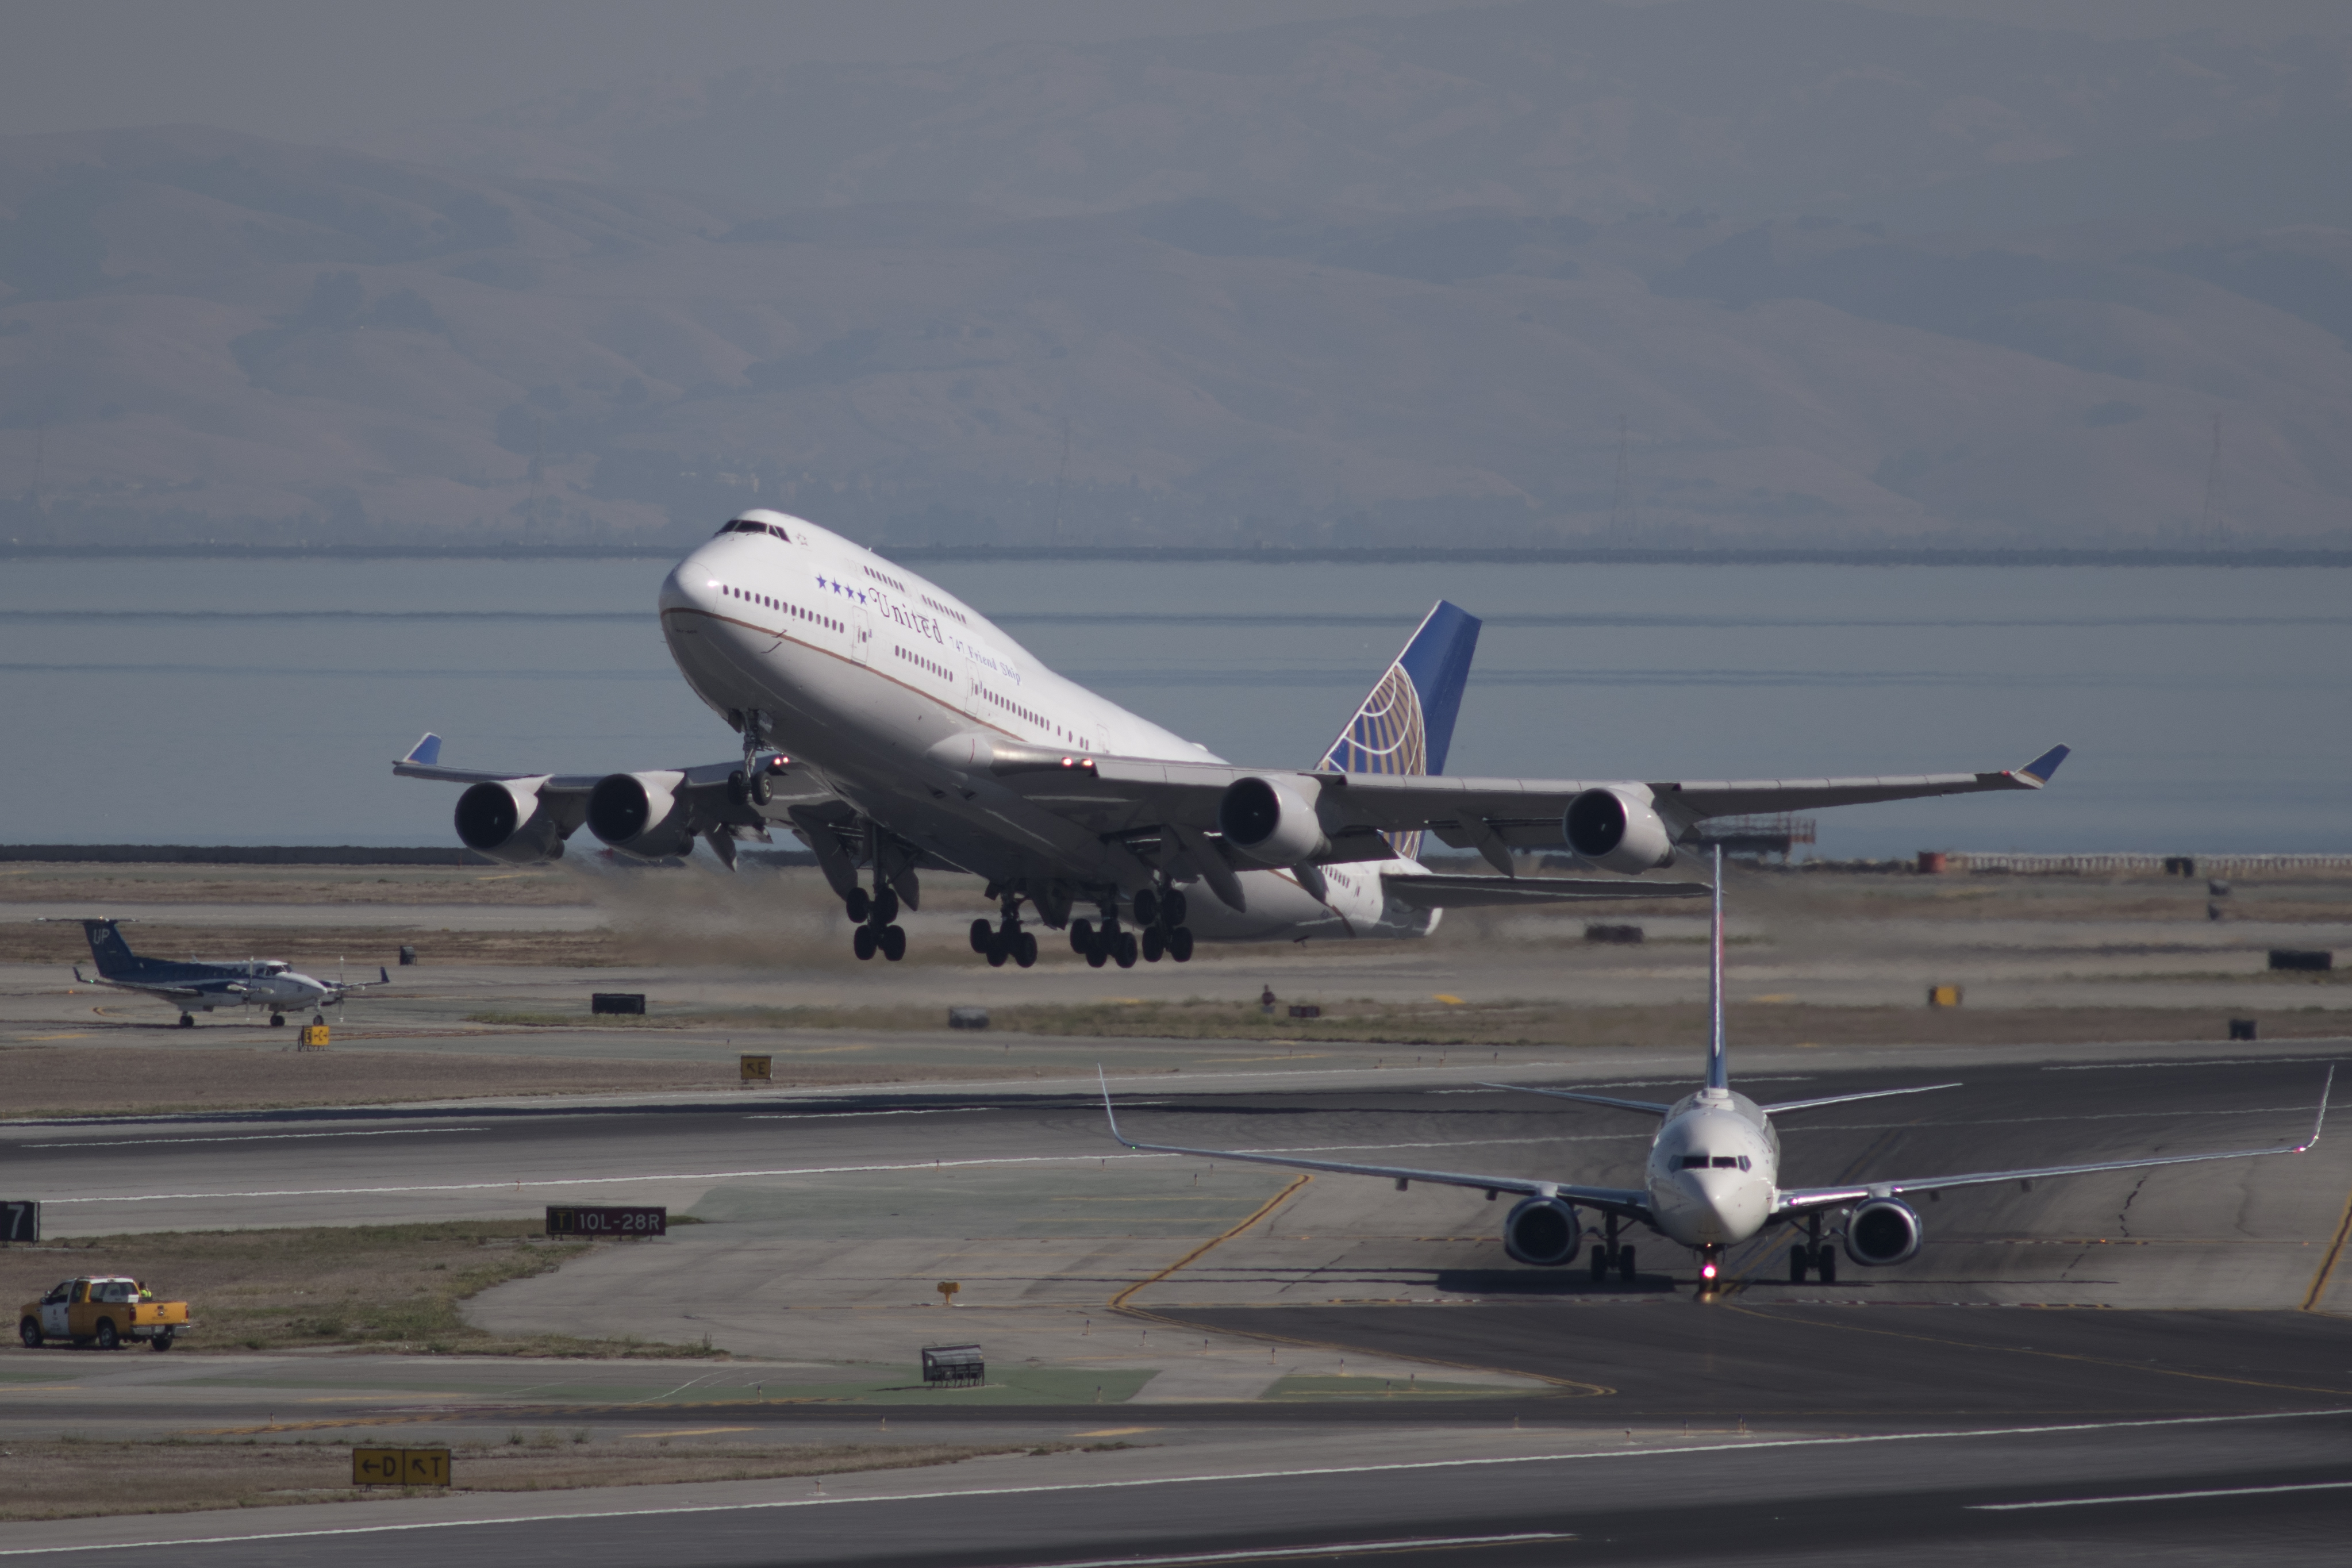 United Airlines' Boeing 747-400 aircraft performed its last passenger flight on November 7, 2017, from San Francisco to Hawaii. (NurPhoto&mdash;NurPhoto via Getty Images)